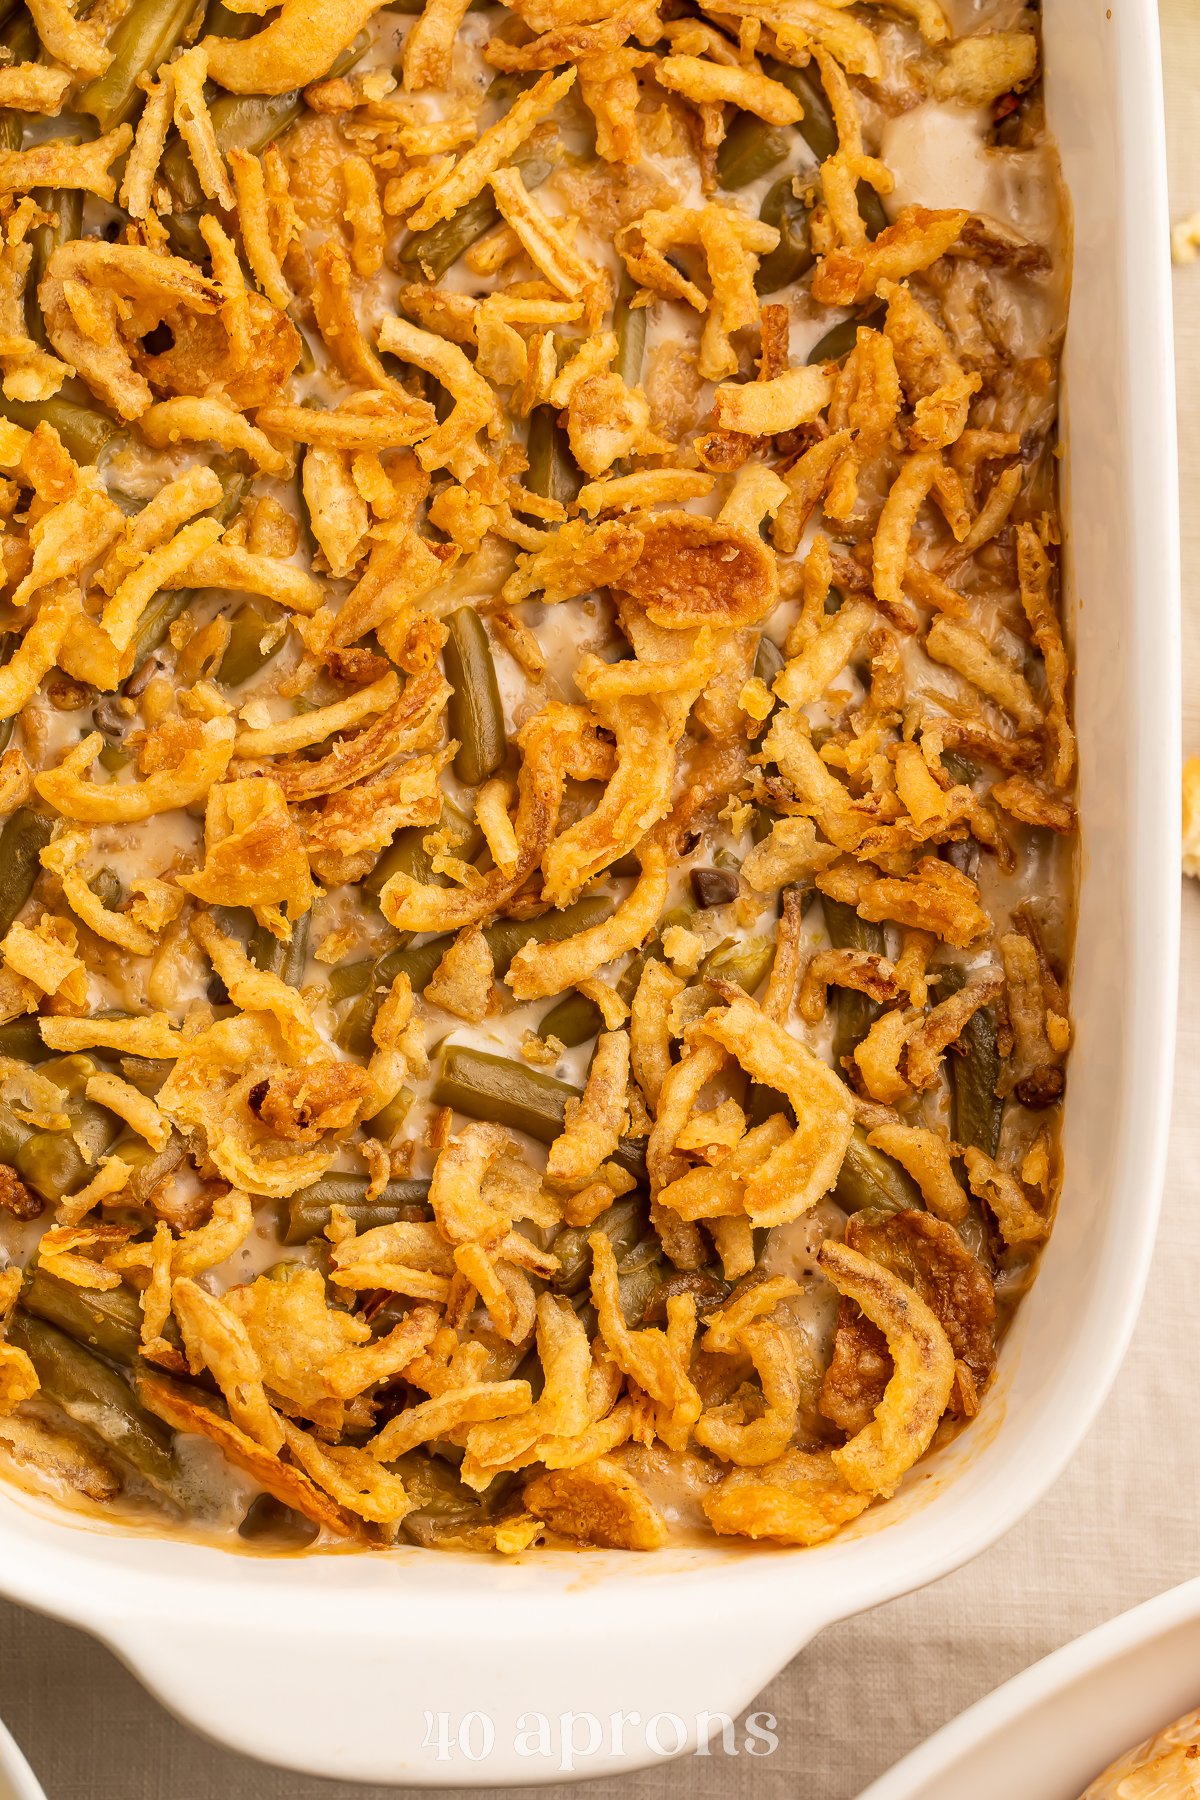 Overhead view of a large rounded rectangular casserole dish holding a make-ahead green bean casserole.